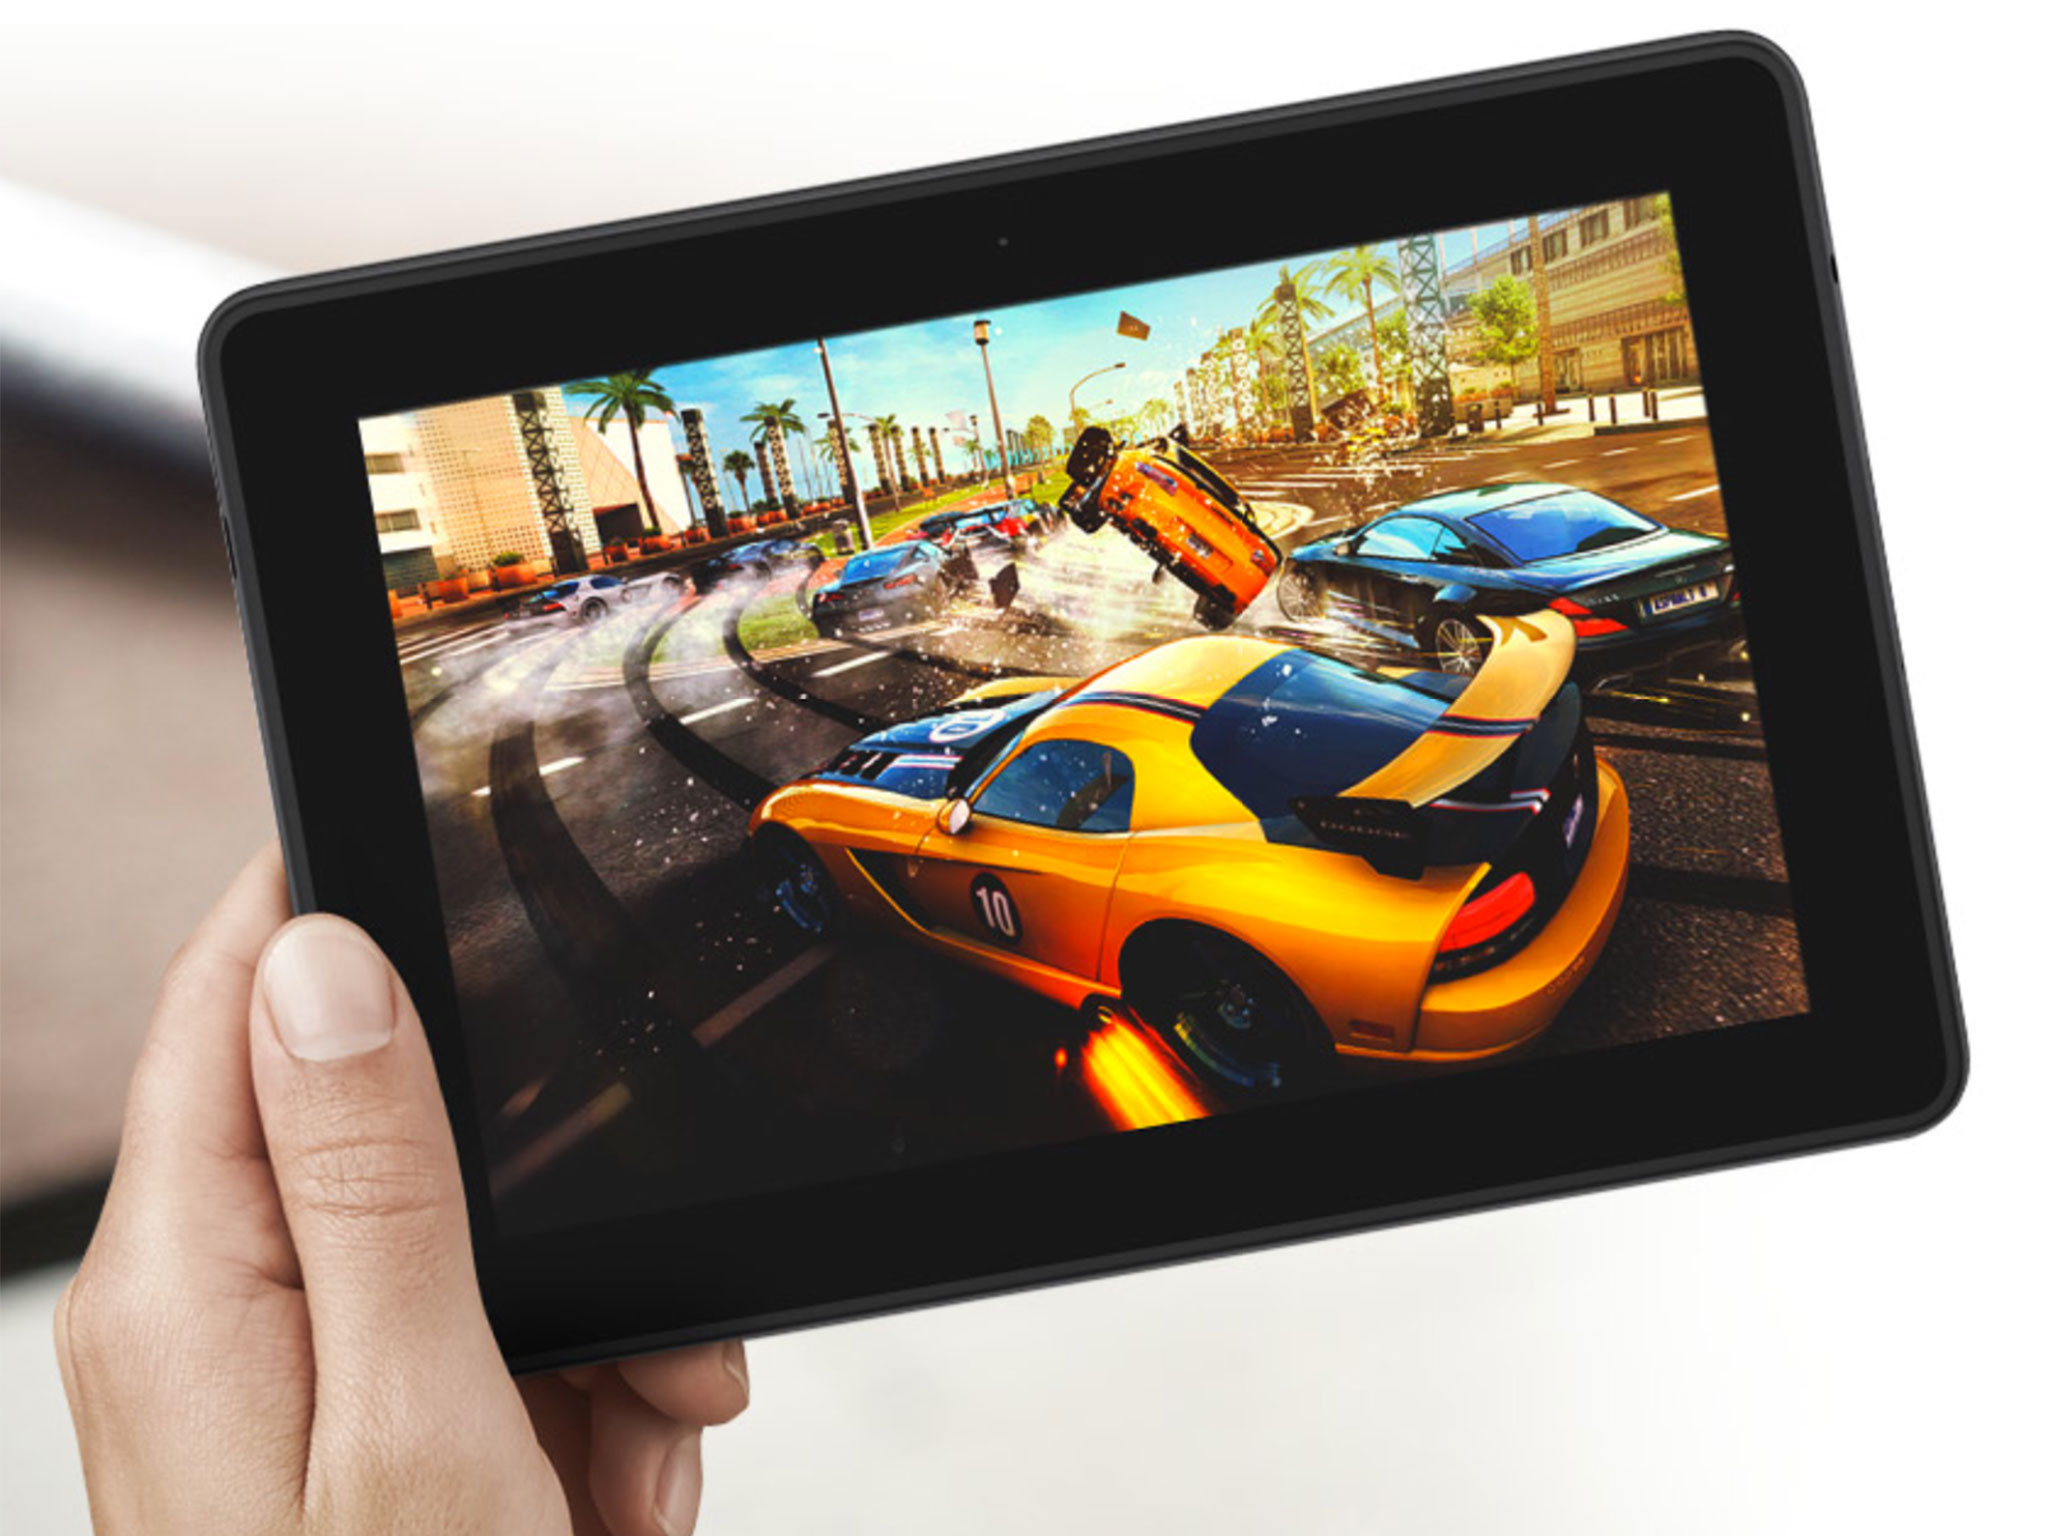 Amazon announces new Kindle Fire HDX tablets ahead of expected October iPad event